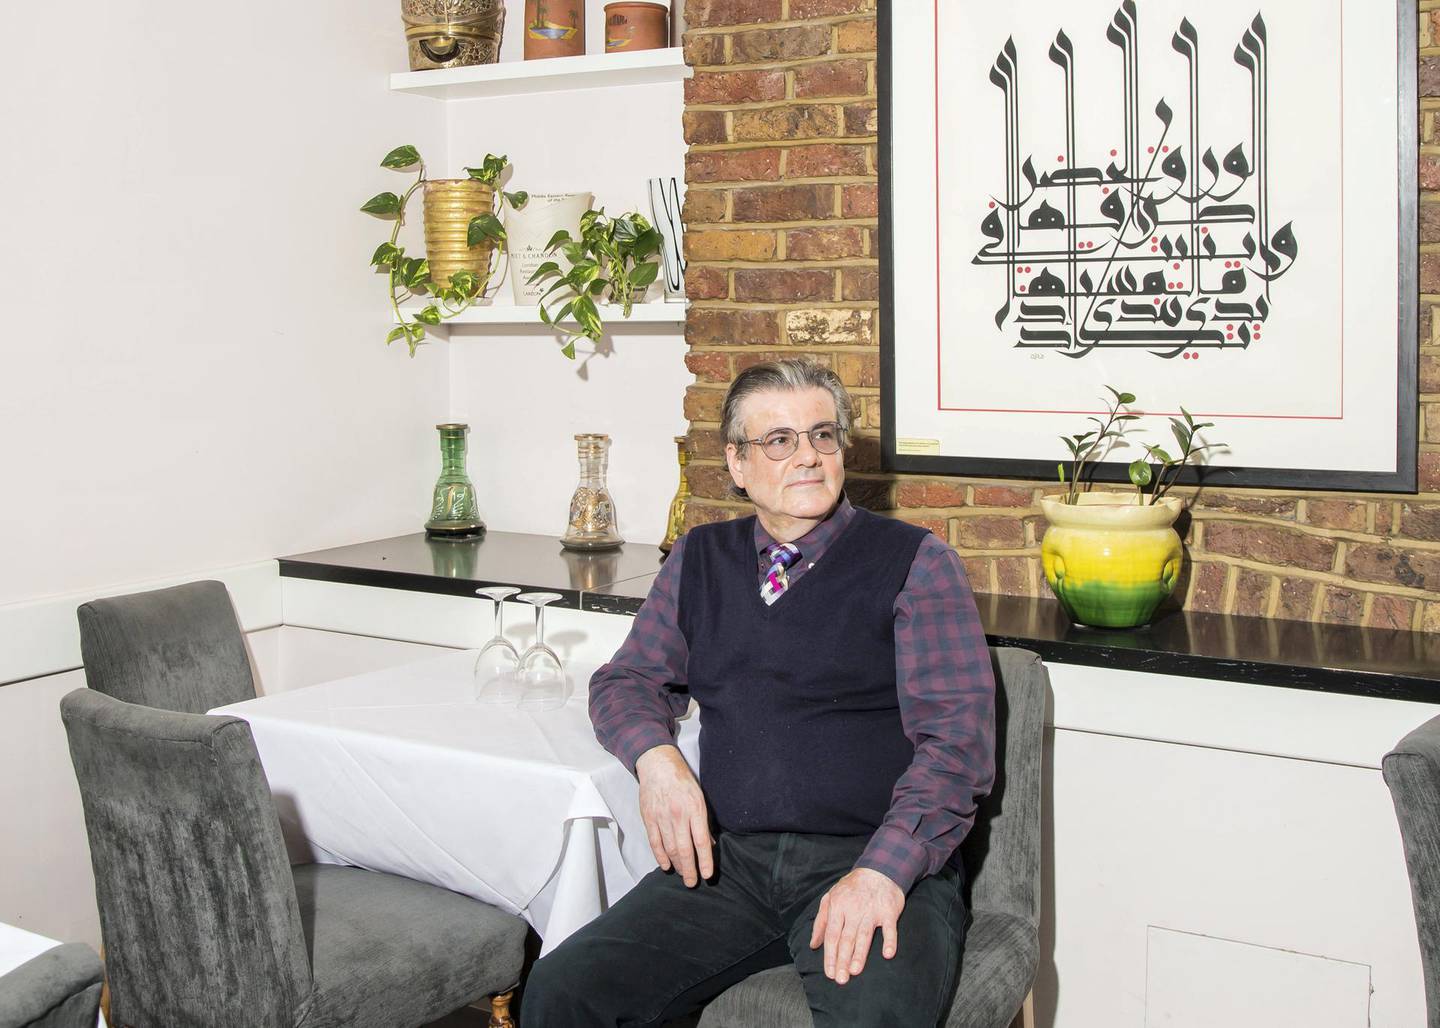 Mohammad Antabli, General Manager of Alwaha Restaurant in Westbourne Grove London. Photographed for TheNational. Calligraphy by Mouneer Al-Shaarani